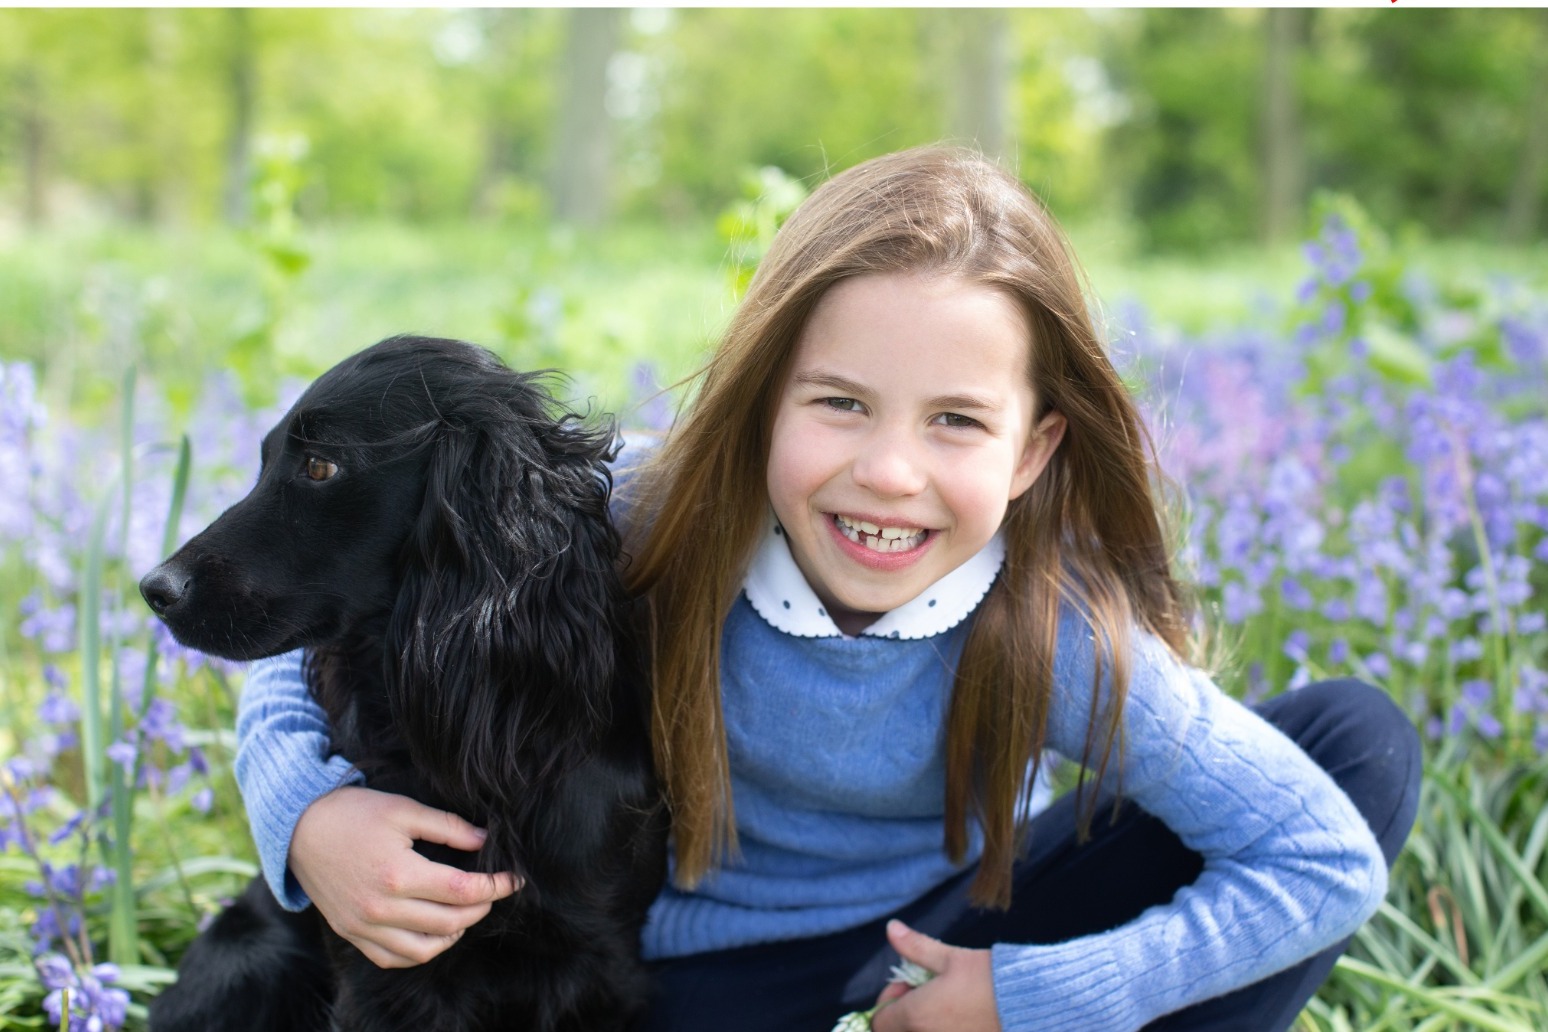 Picture released of Princess Charlotte and pet dog Orla to mark seventh birthday 